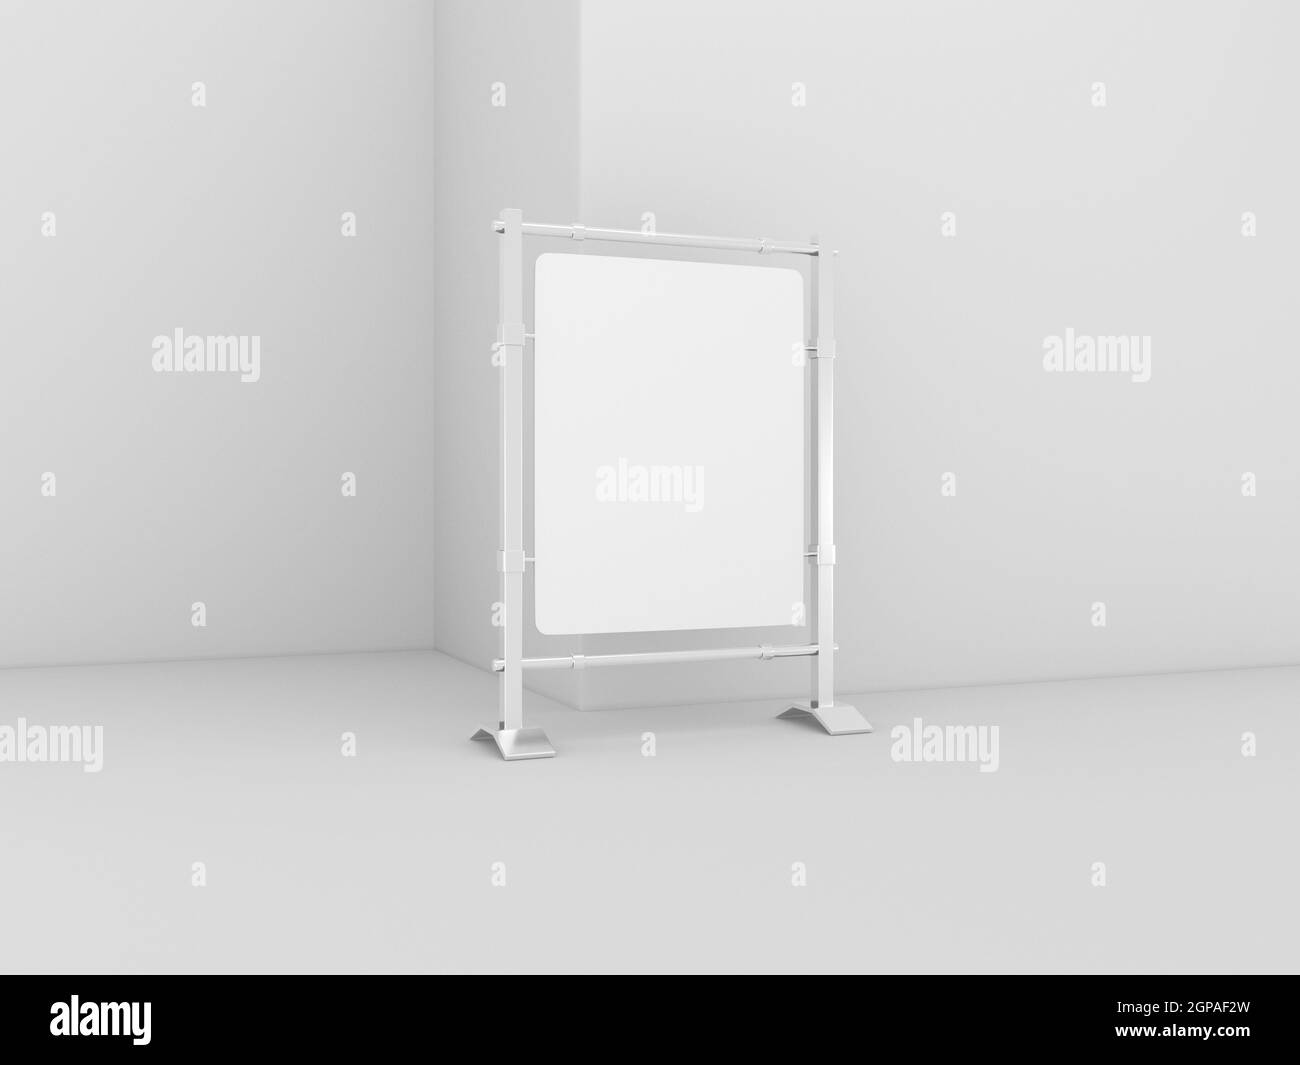 Outdoor advertising stand sandwich board mock up template 3D rendered illustration. Realistic Standee signage board. Stock Photo